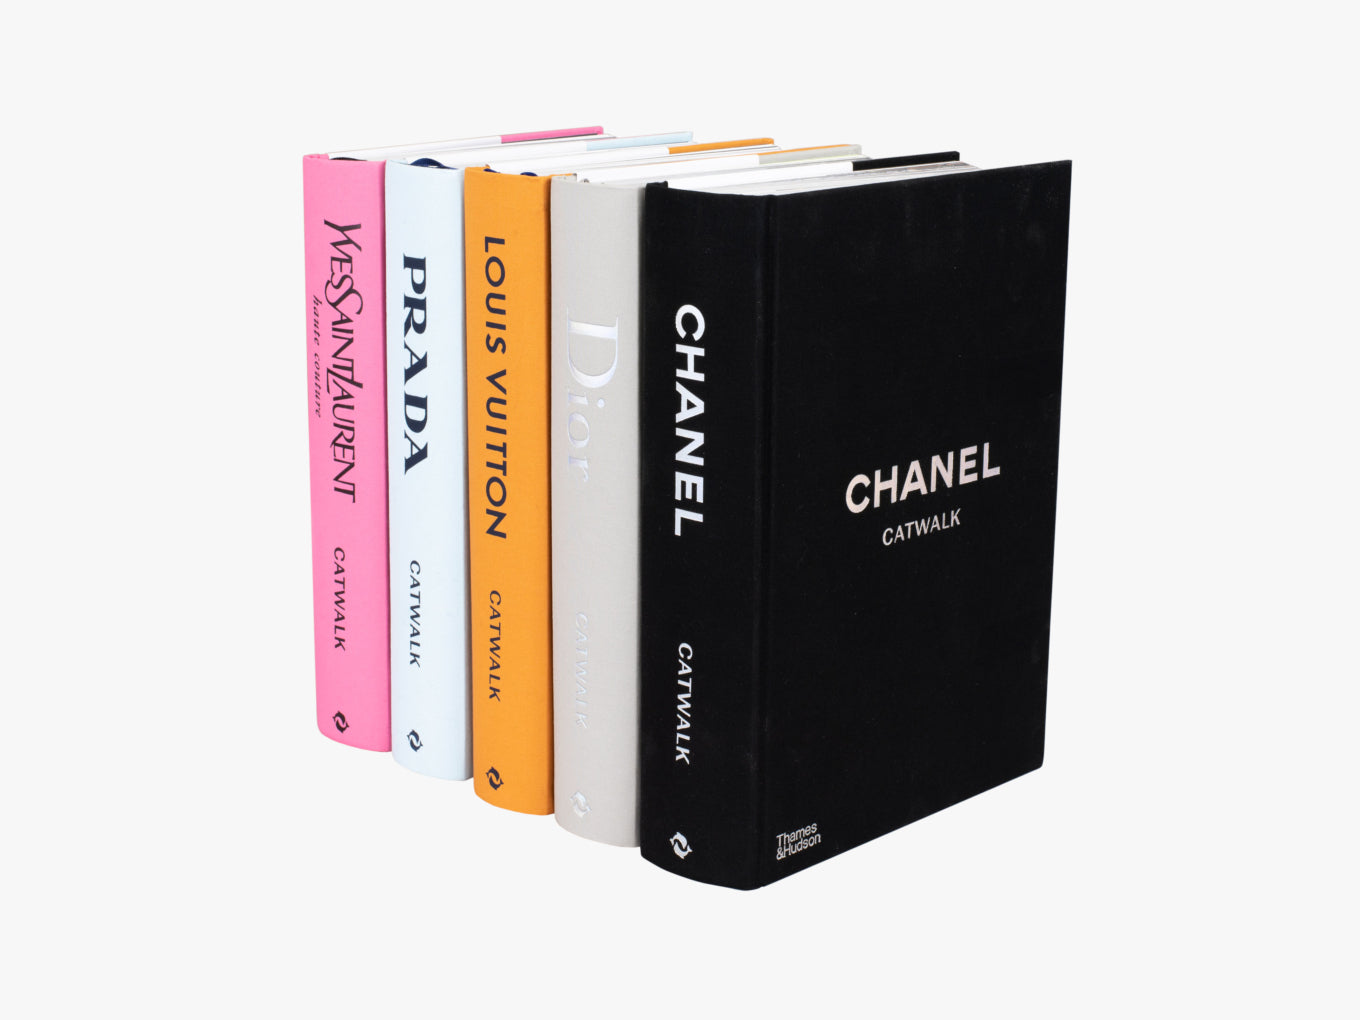 Chanel Catwalk Book, Coffee Table Books